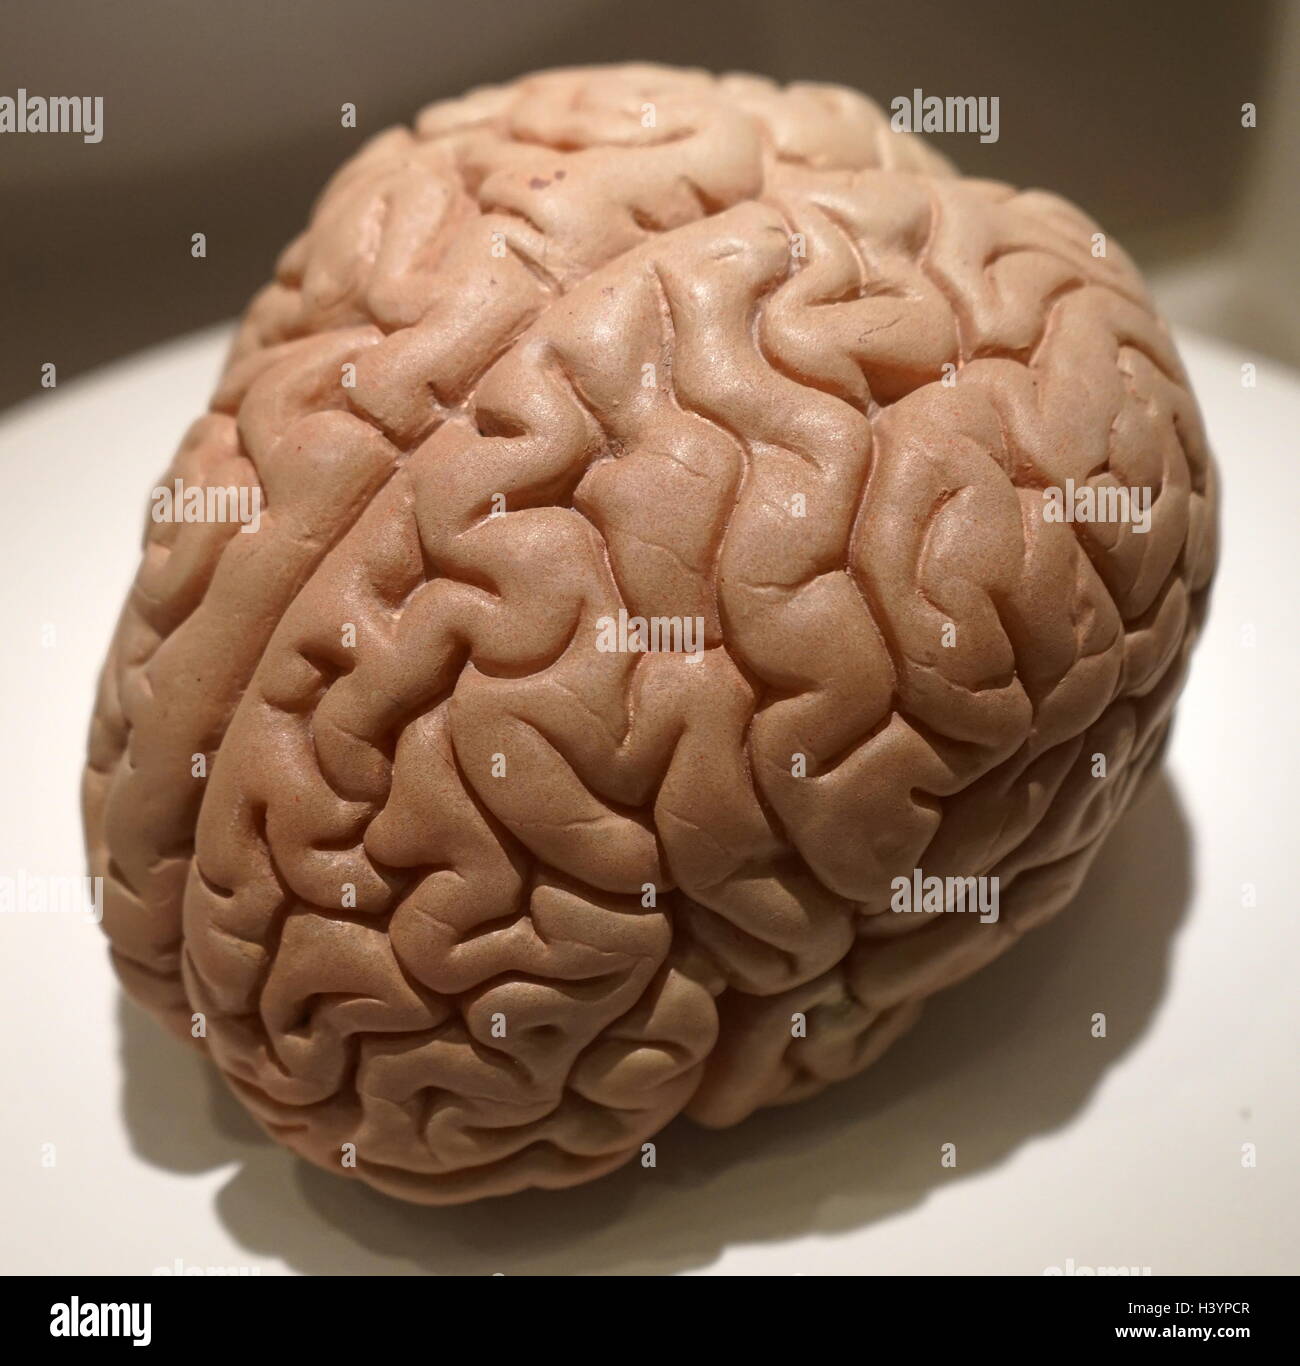 Life-size model of a human brain. The brain is an organ that serves as the